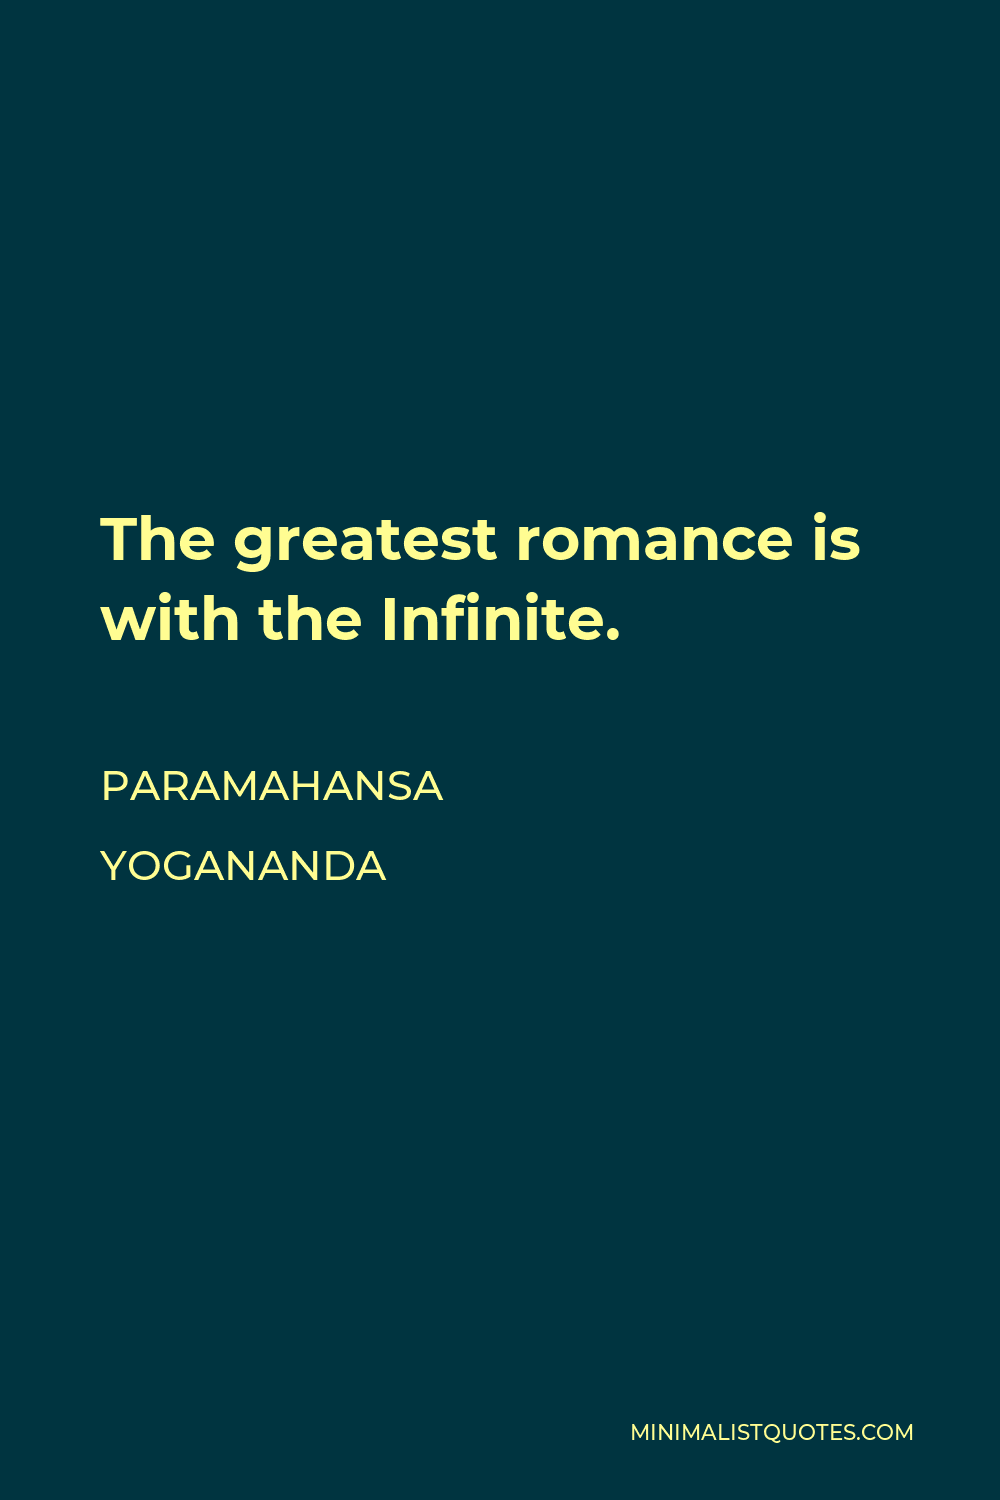 Paramahansa Yogananda Quote - The greatest romance is with the Infinite. You have no idea how beautiful life can be. When you suddenly find God everywhere, when He comes and talks to you and guides you, the romance of divine love has begun.